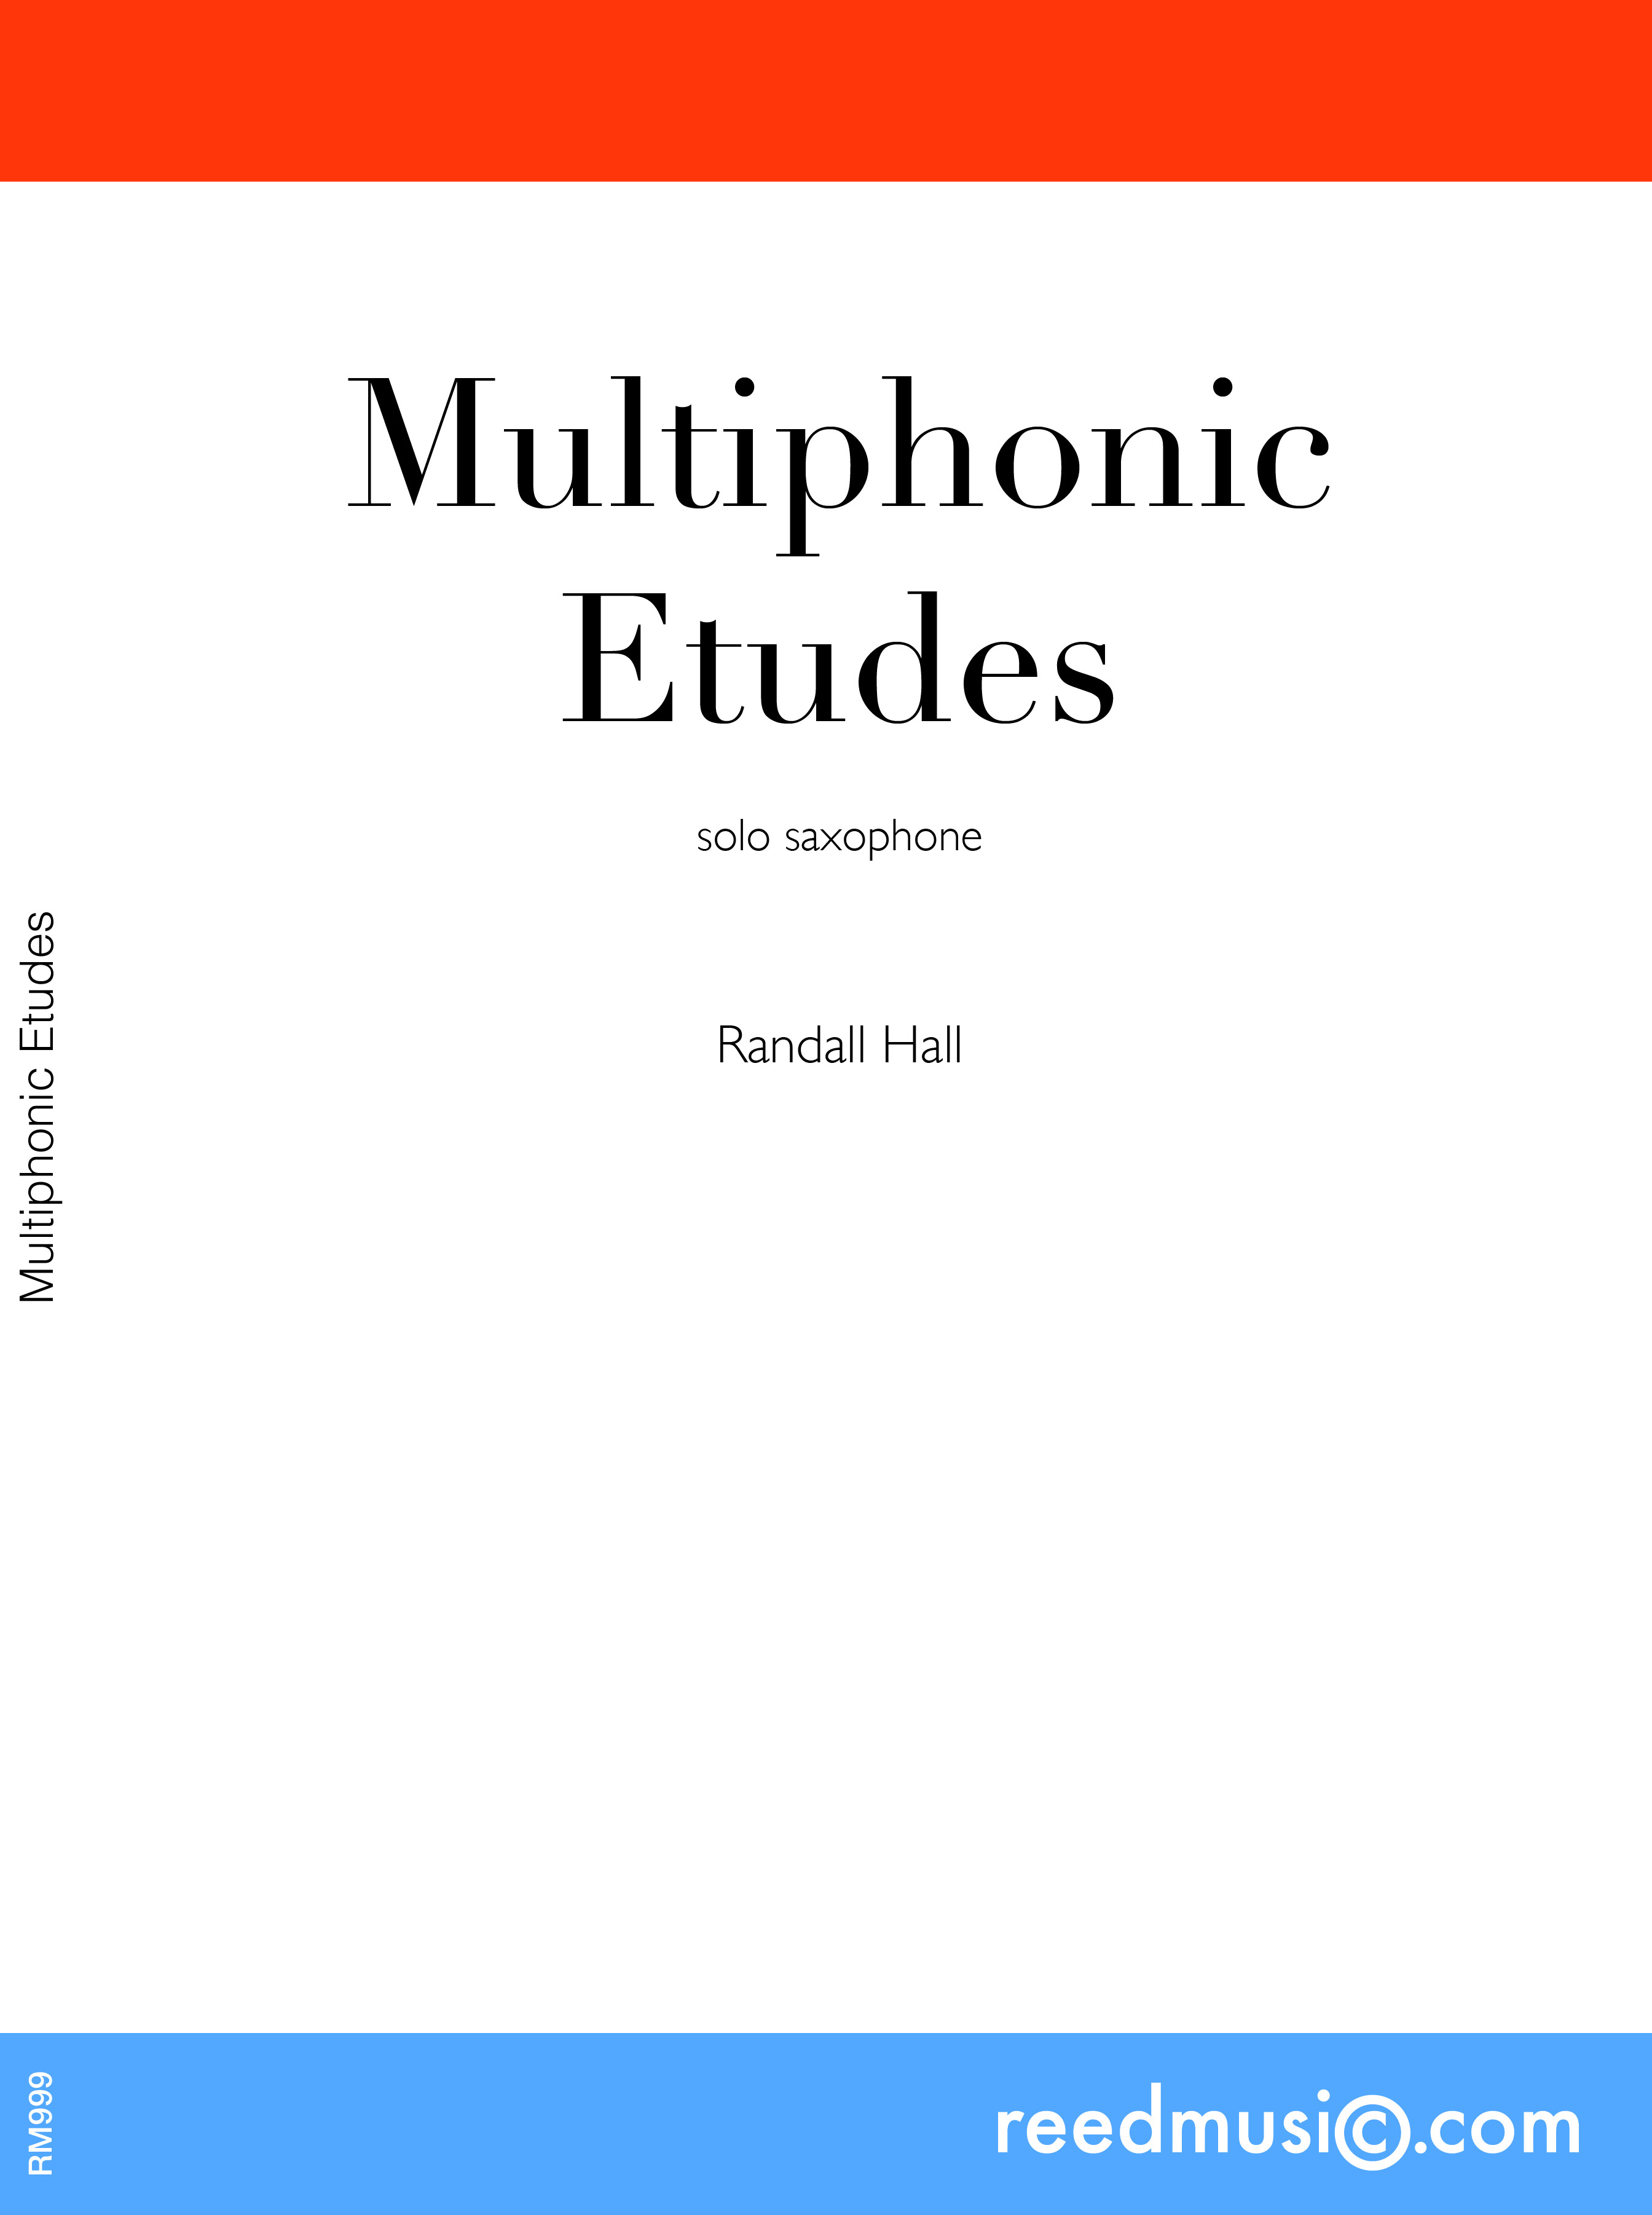 global Foundation forest Multiphonic Etudes (24 Pieces) | Reed Music